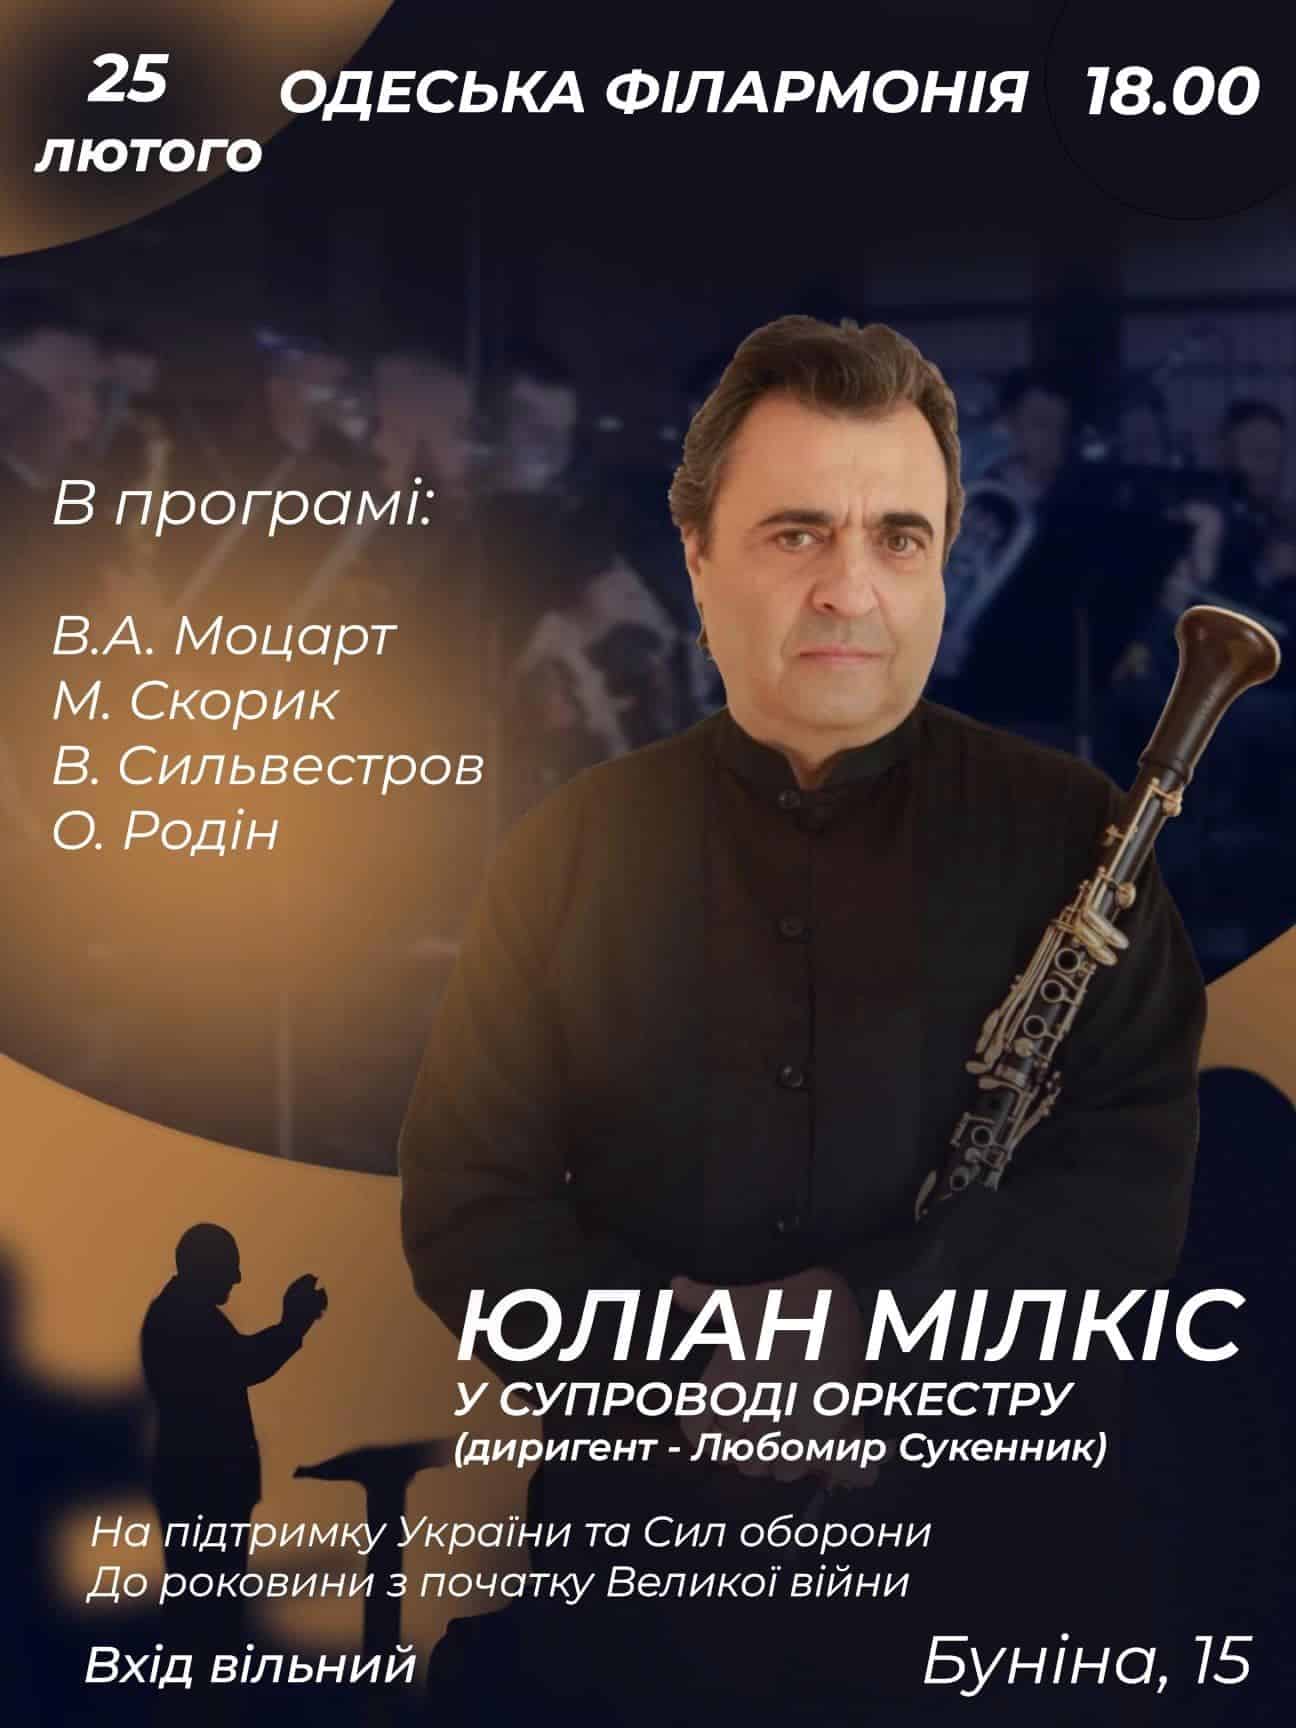 Music in Odesa, a year into the war